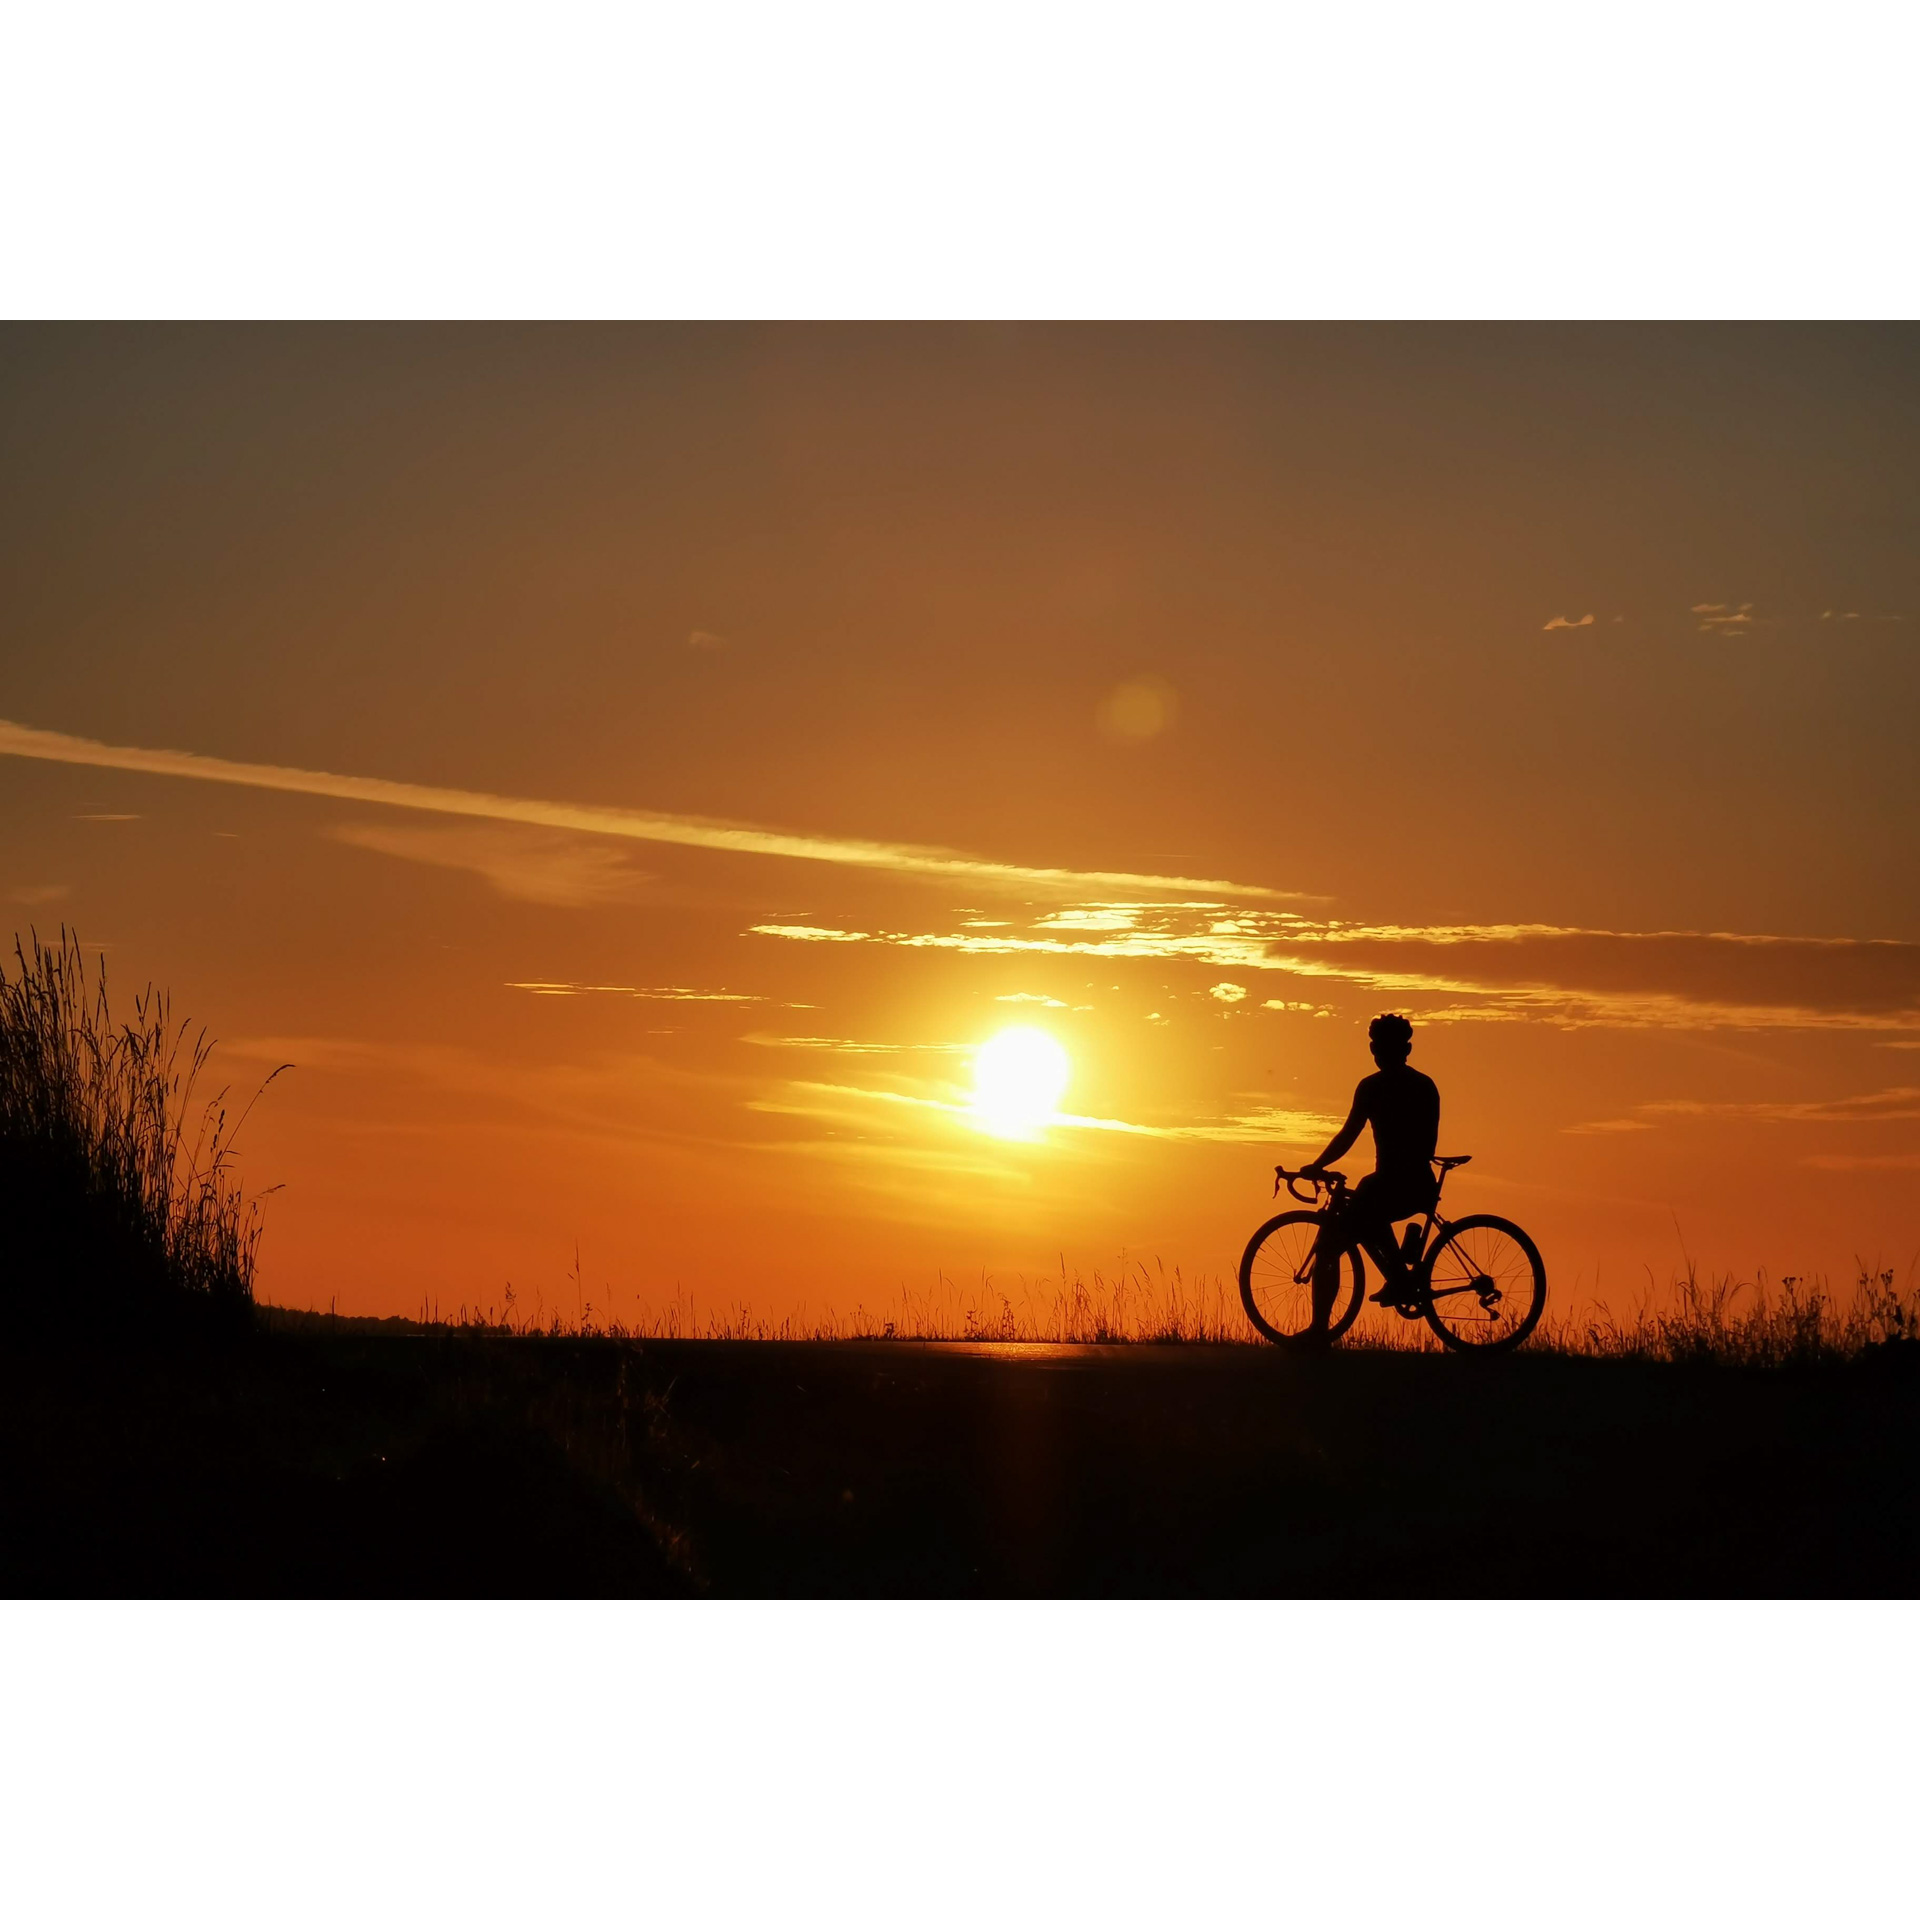 A cyclist sitting on a bicycle against the setting sun